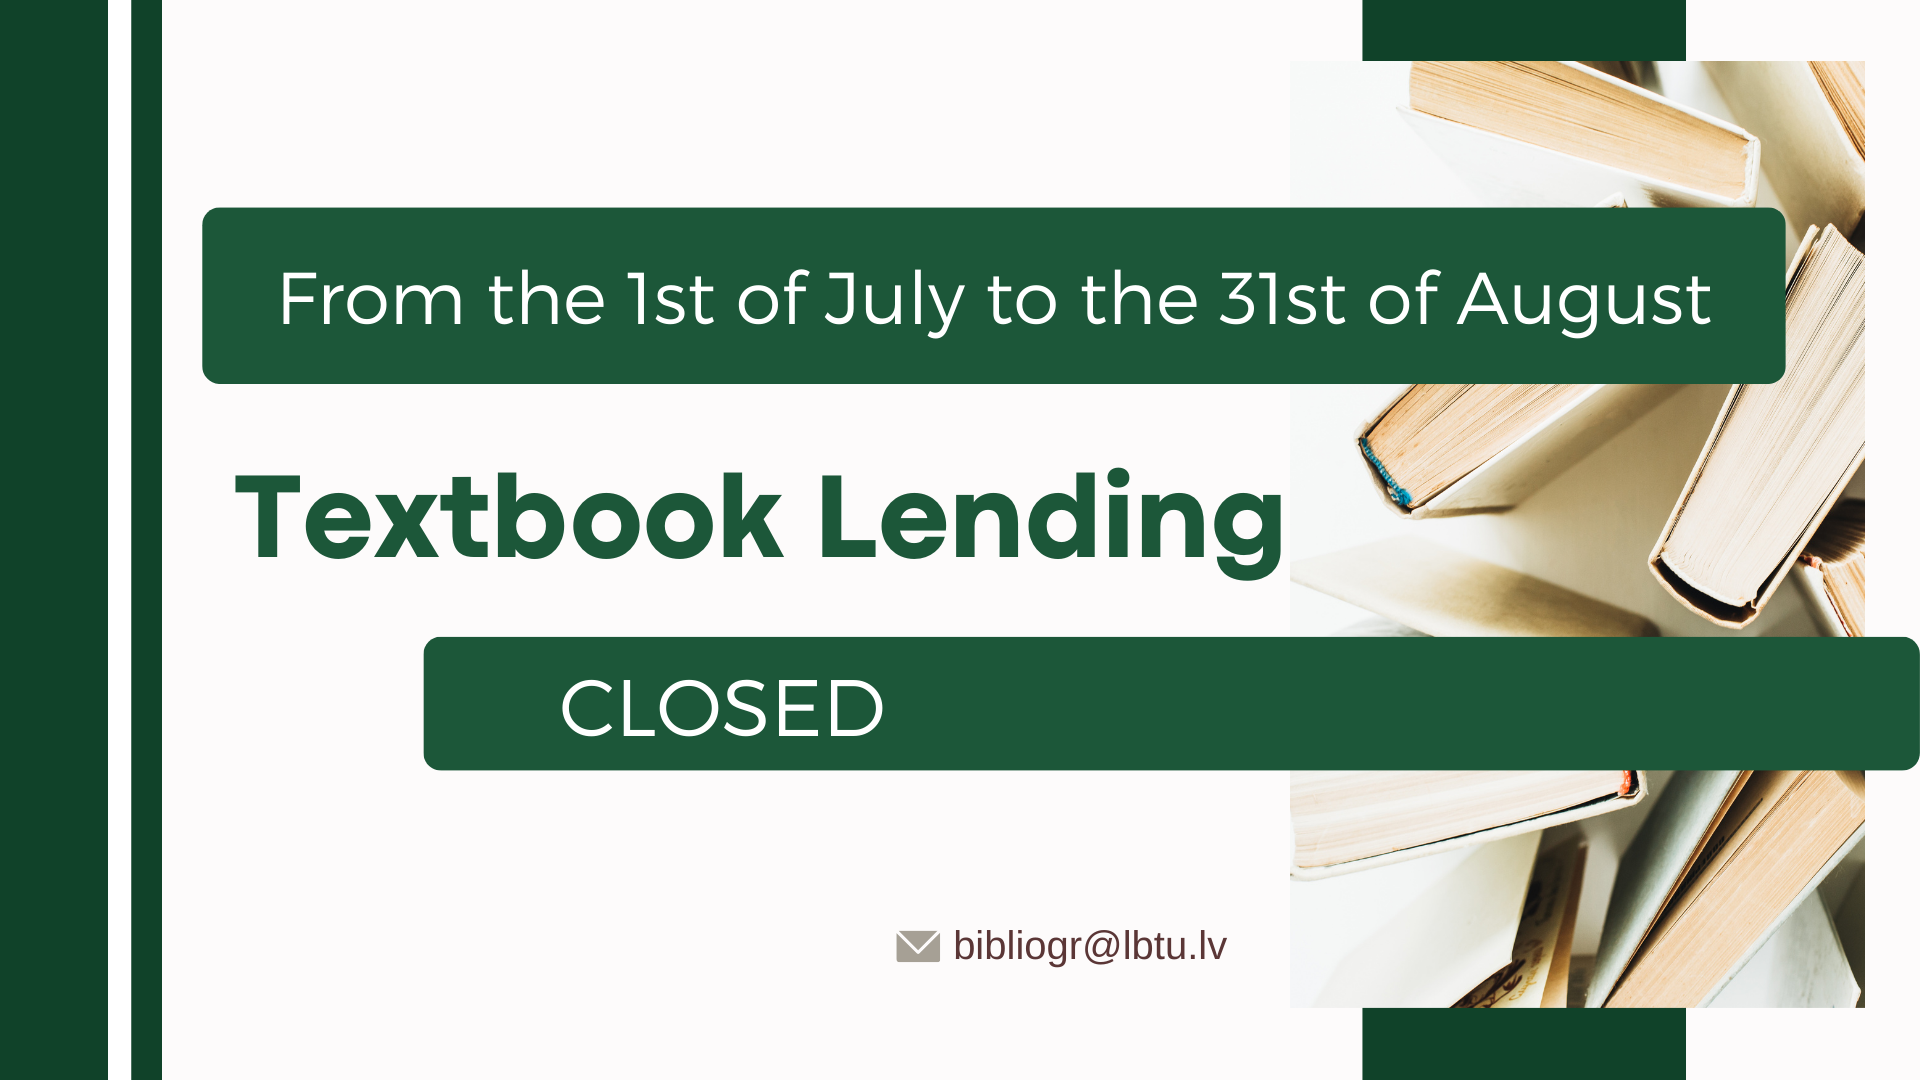 From the 1st of July to the 31st of August Textbook Lending closed.